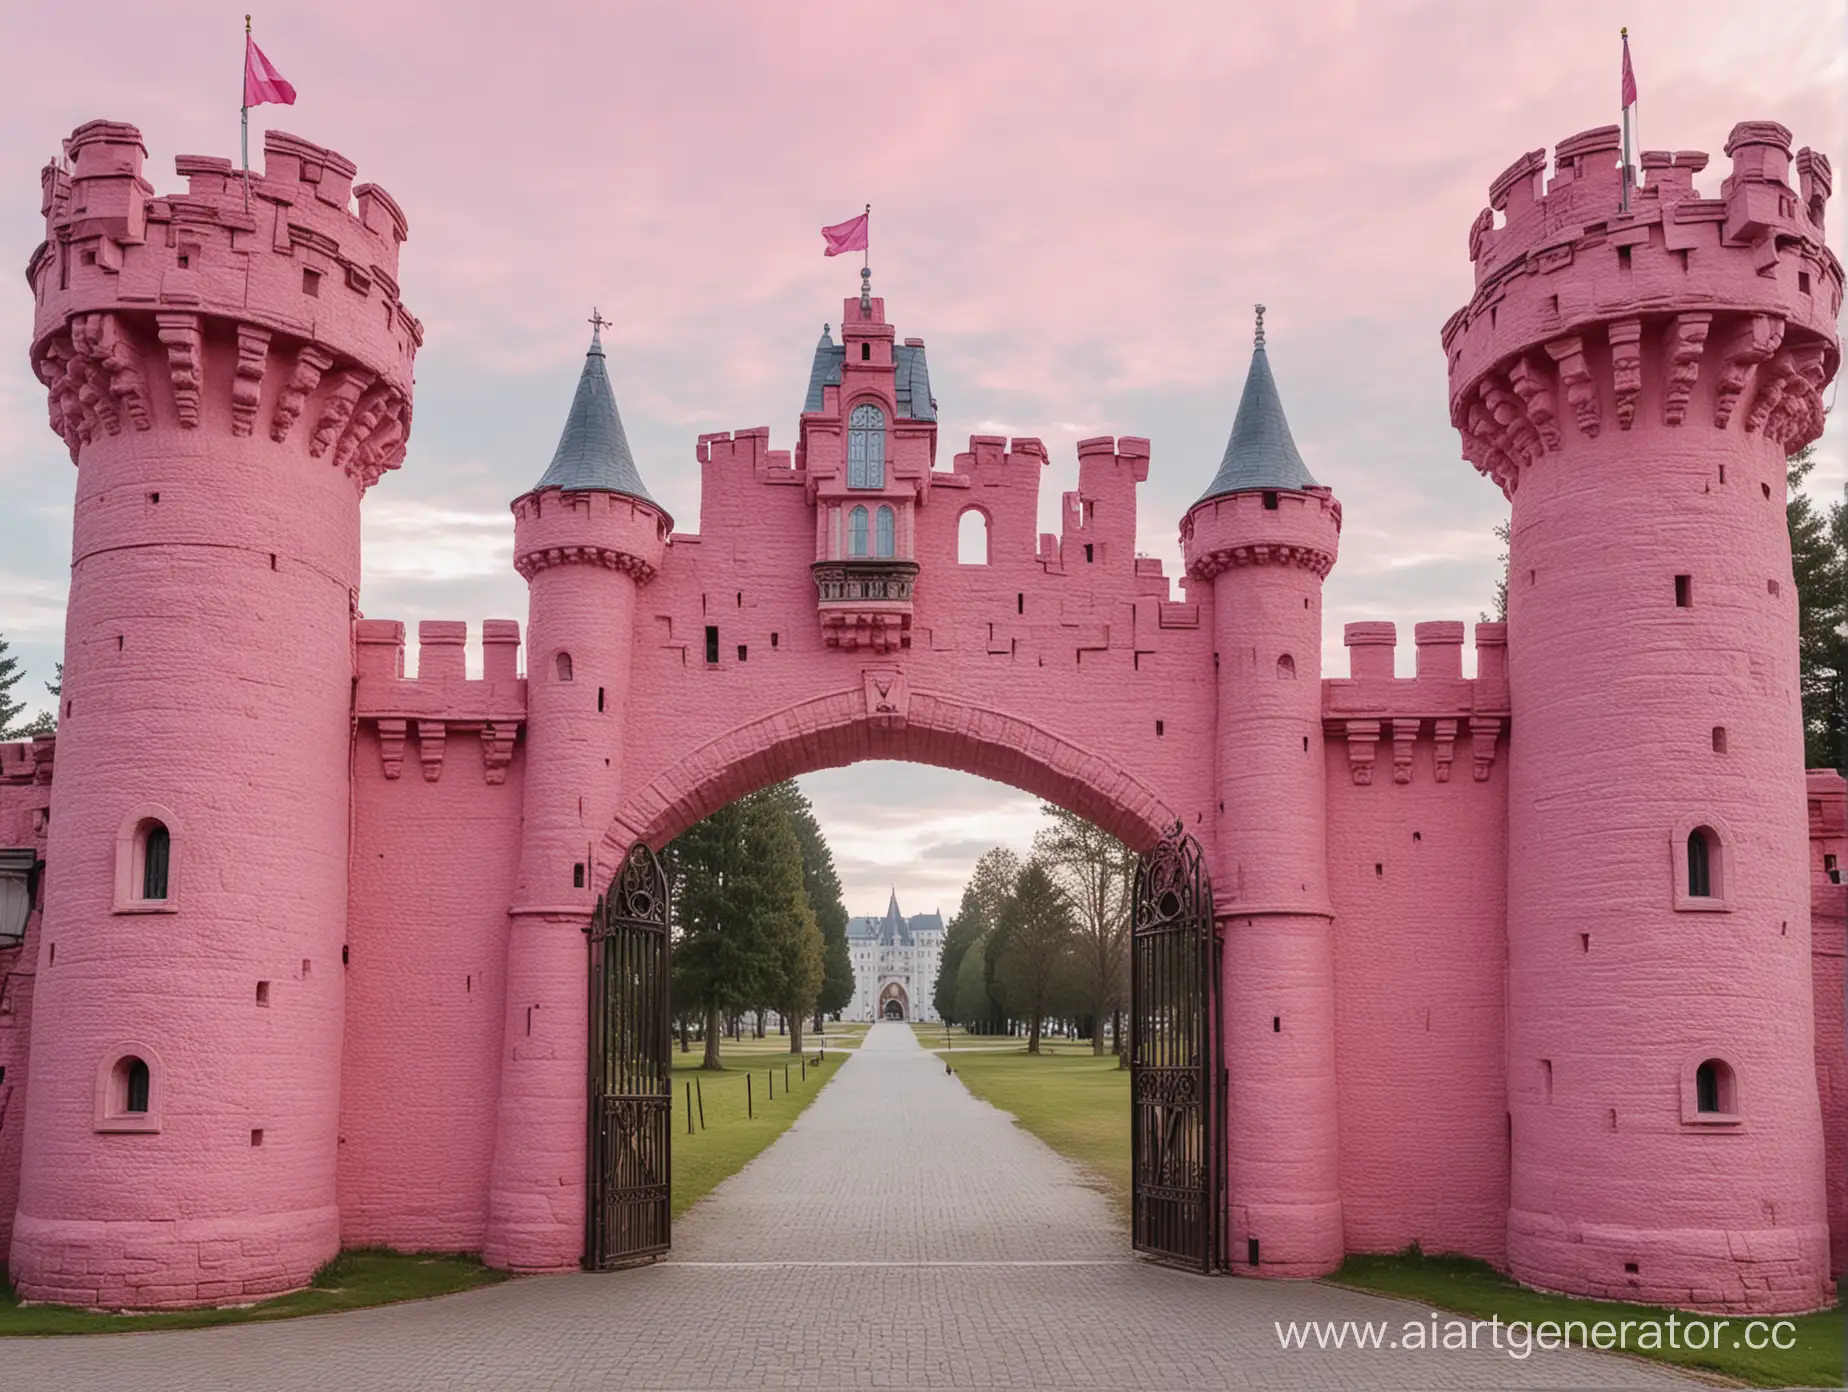 Enchanted-Pink-Castle-with-Grand-Entrance-Gate